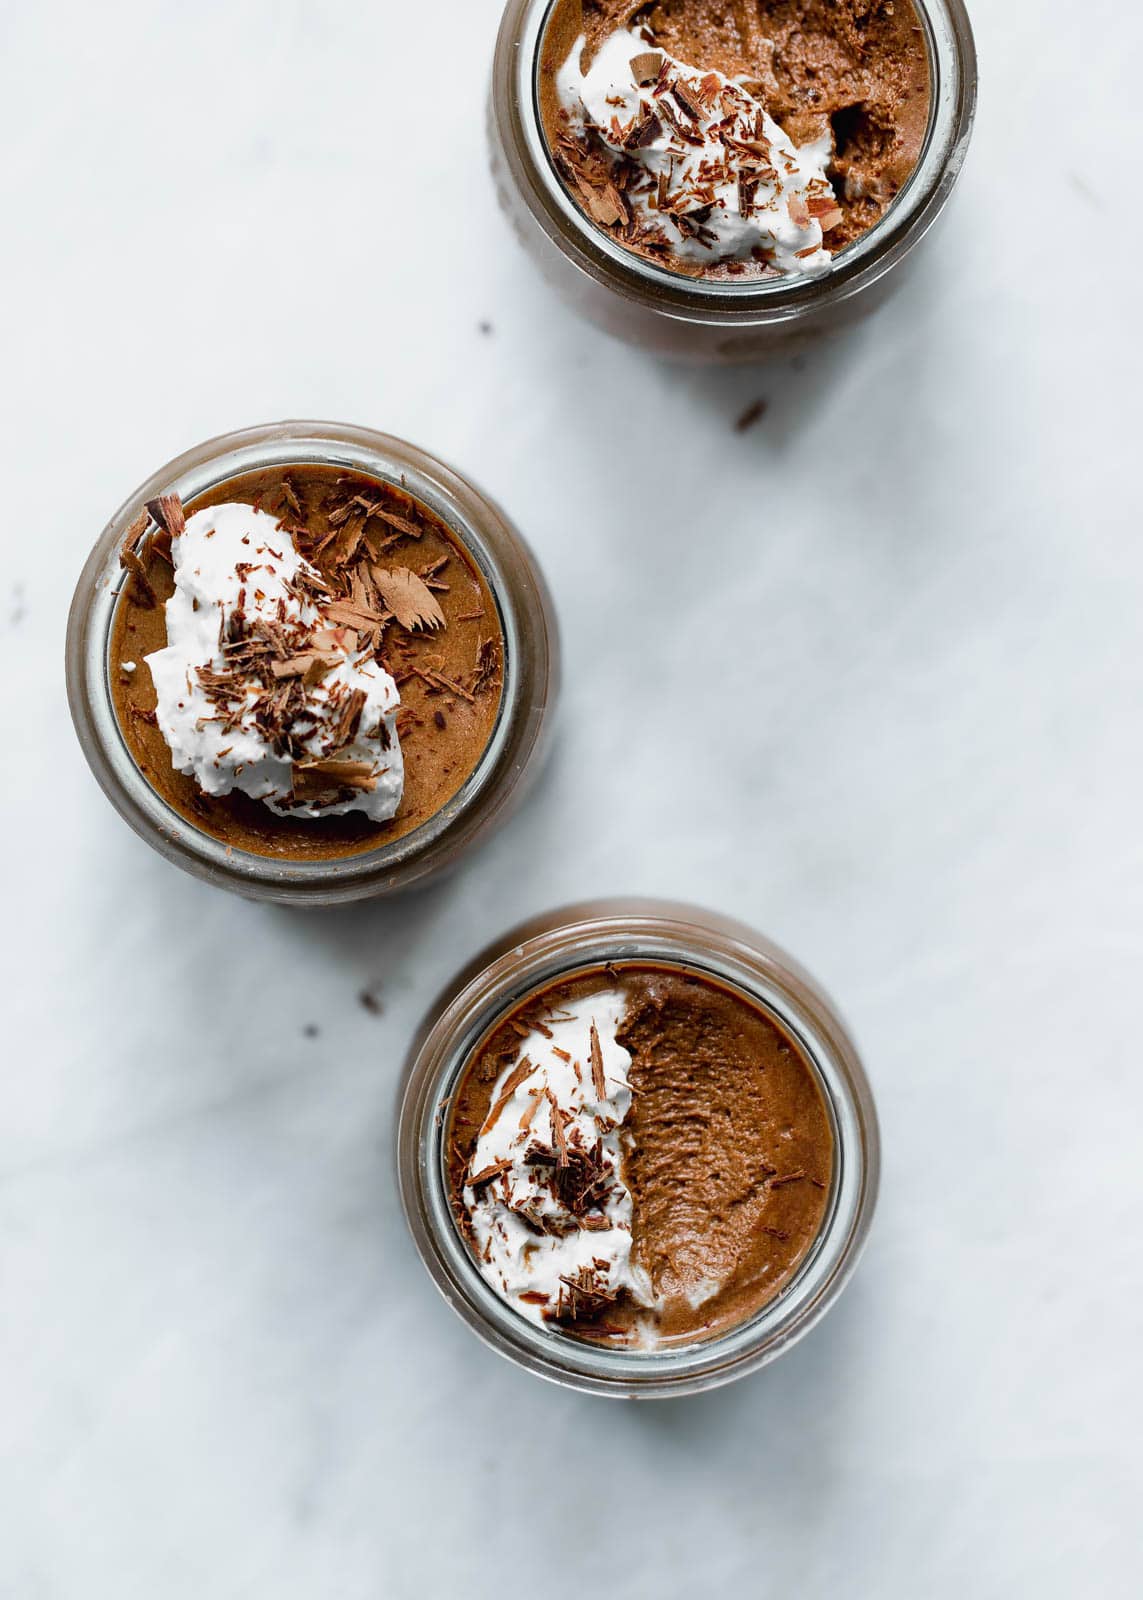 Easy Chocolate Mousse with whipped cream and chocolate shavings